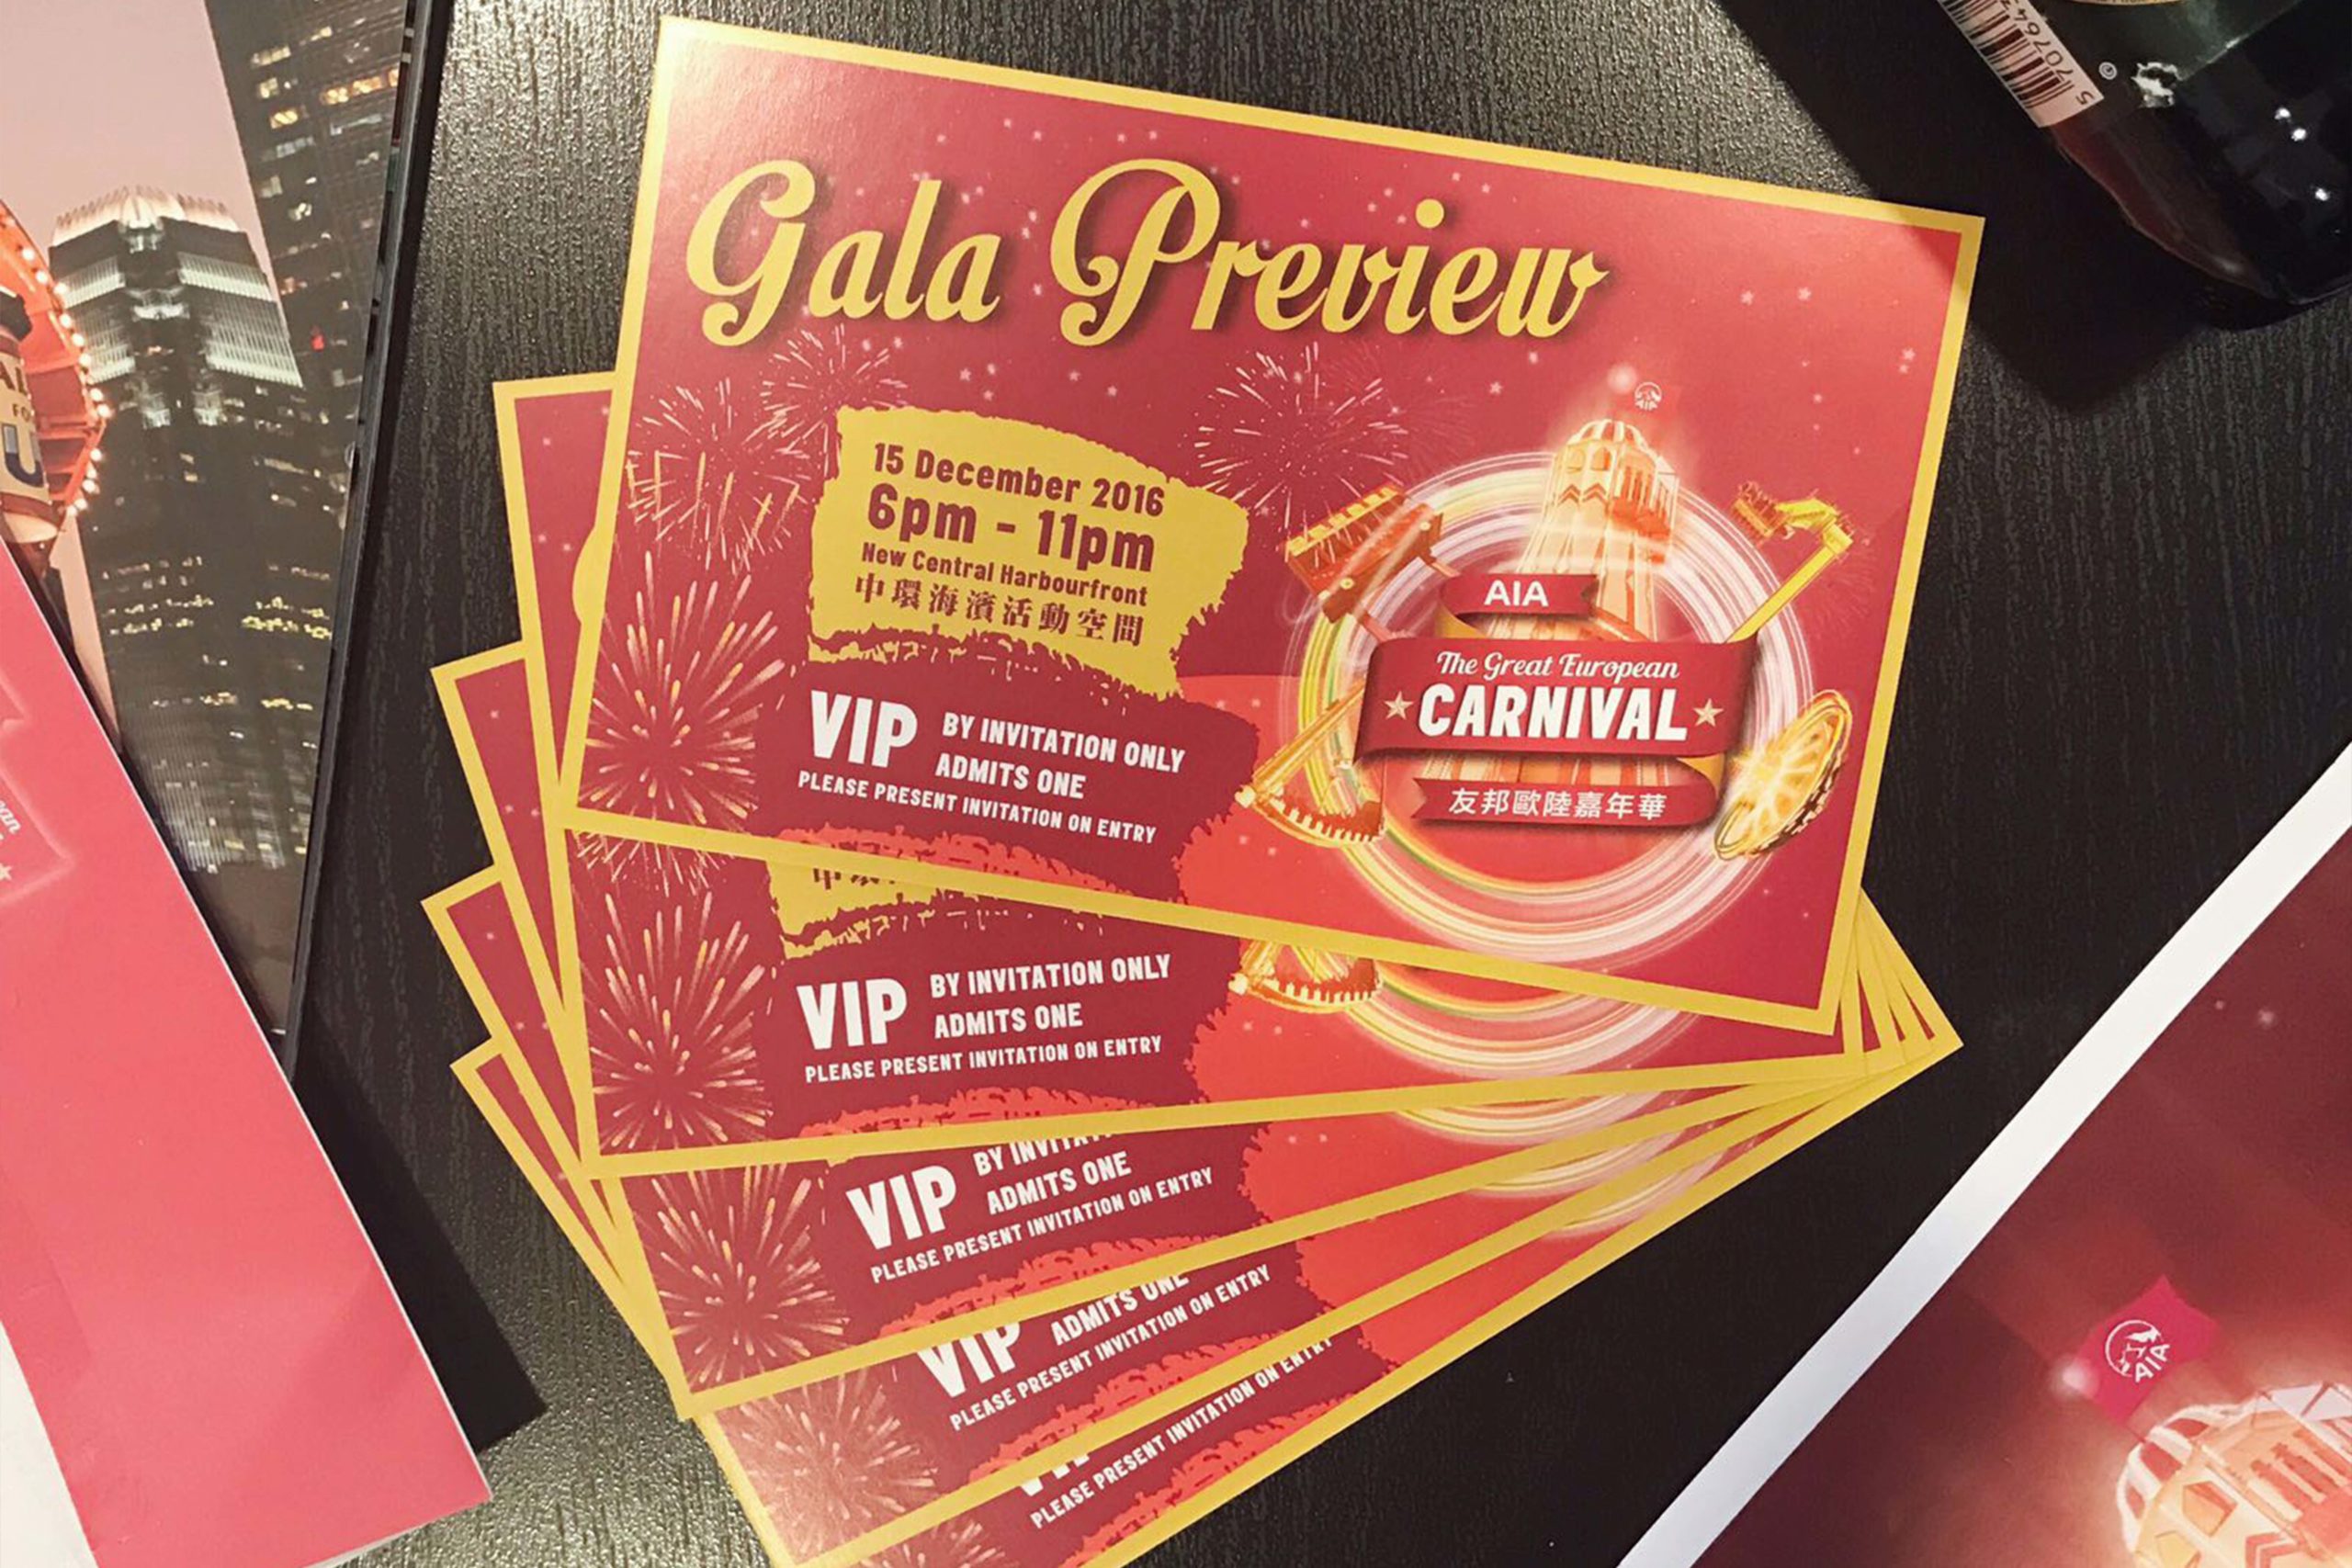 AIA Carnival Hong Kong Event Promotion Ticket Design